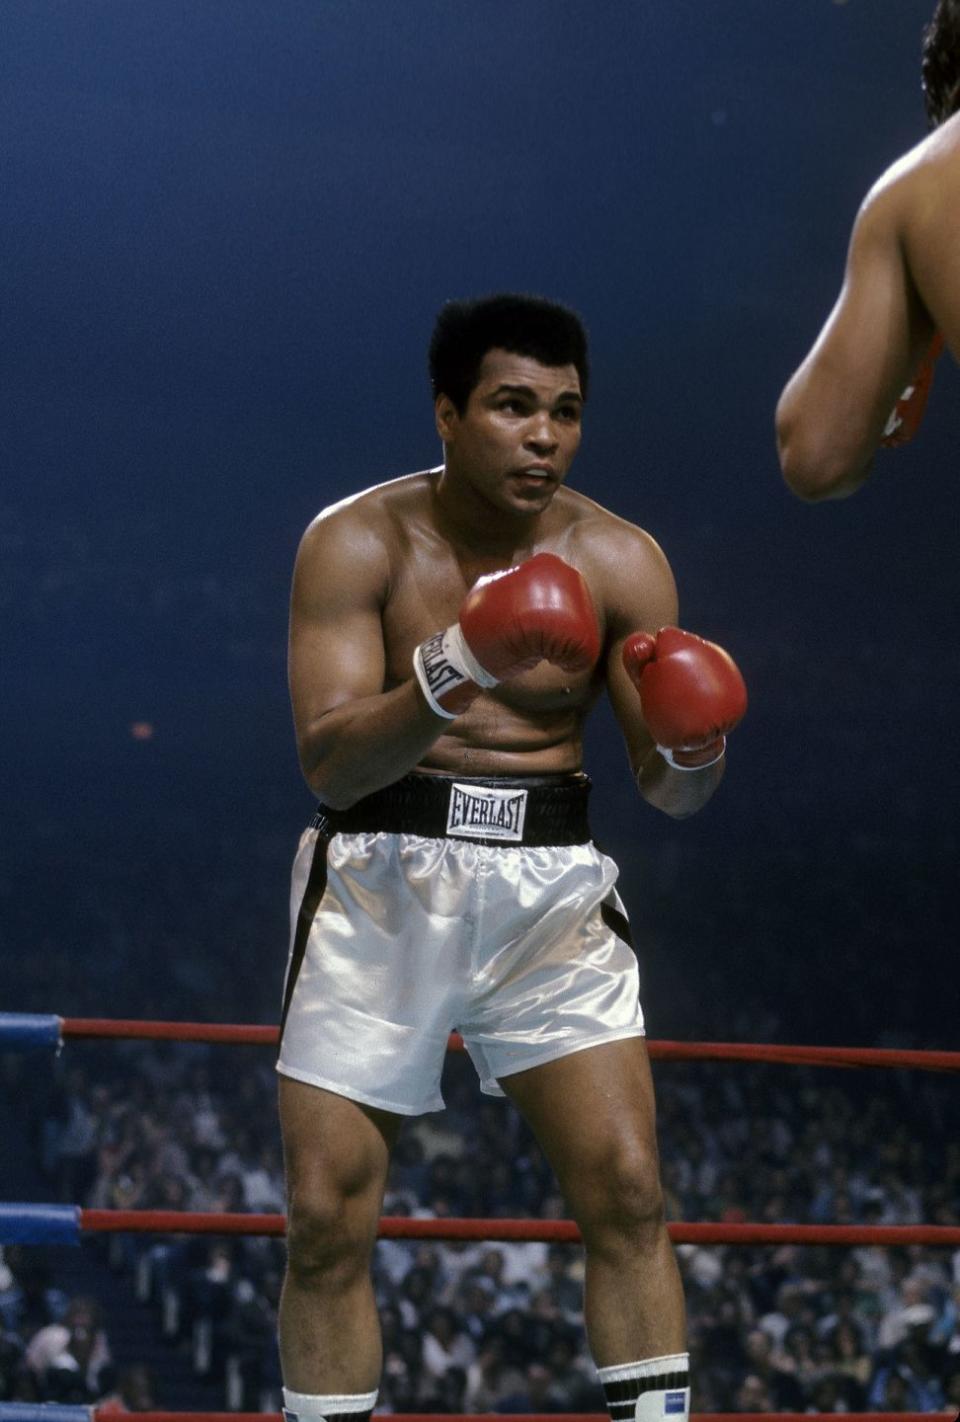 Muhammad Ali in the boxing ring, 1977